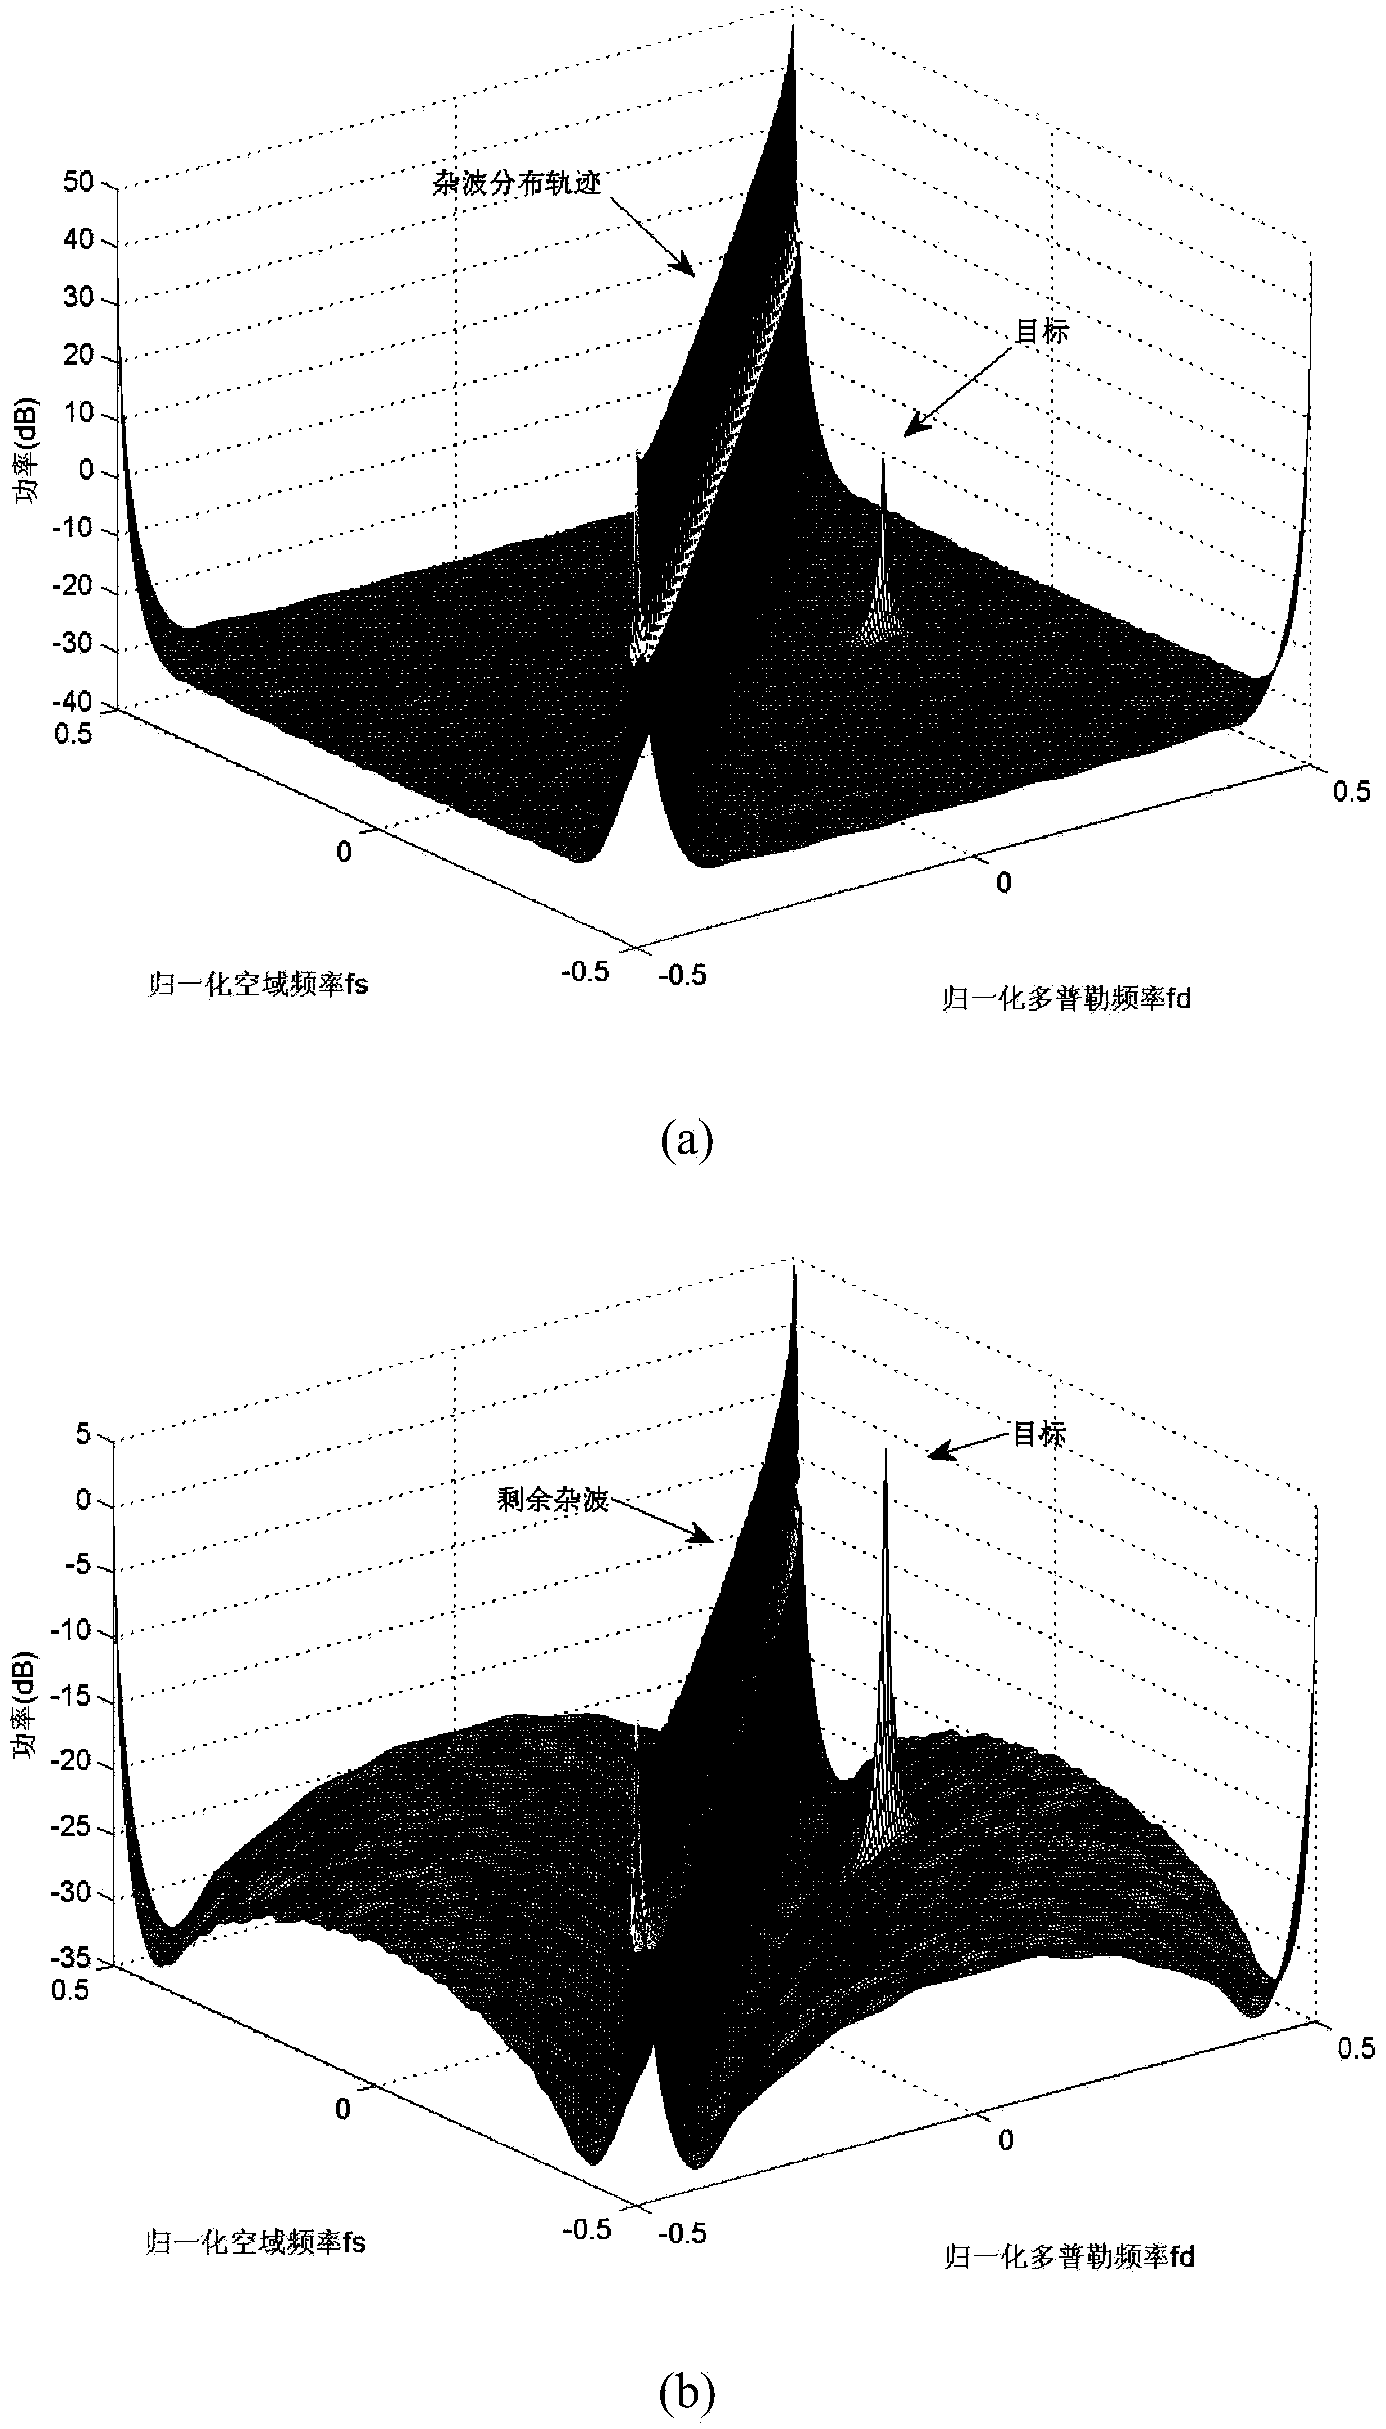 Space time code three-dimensional self-adaptation clutter cancelling method for onboard multiple input multiple output (MIMO) radar